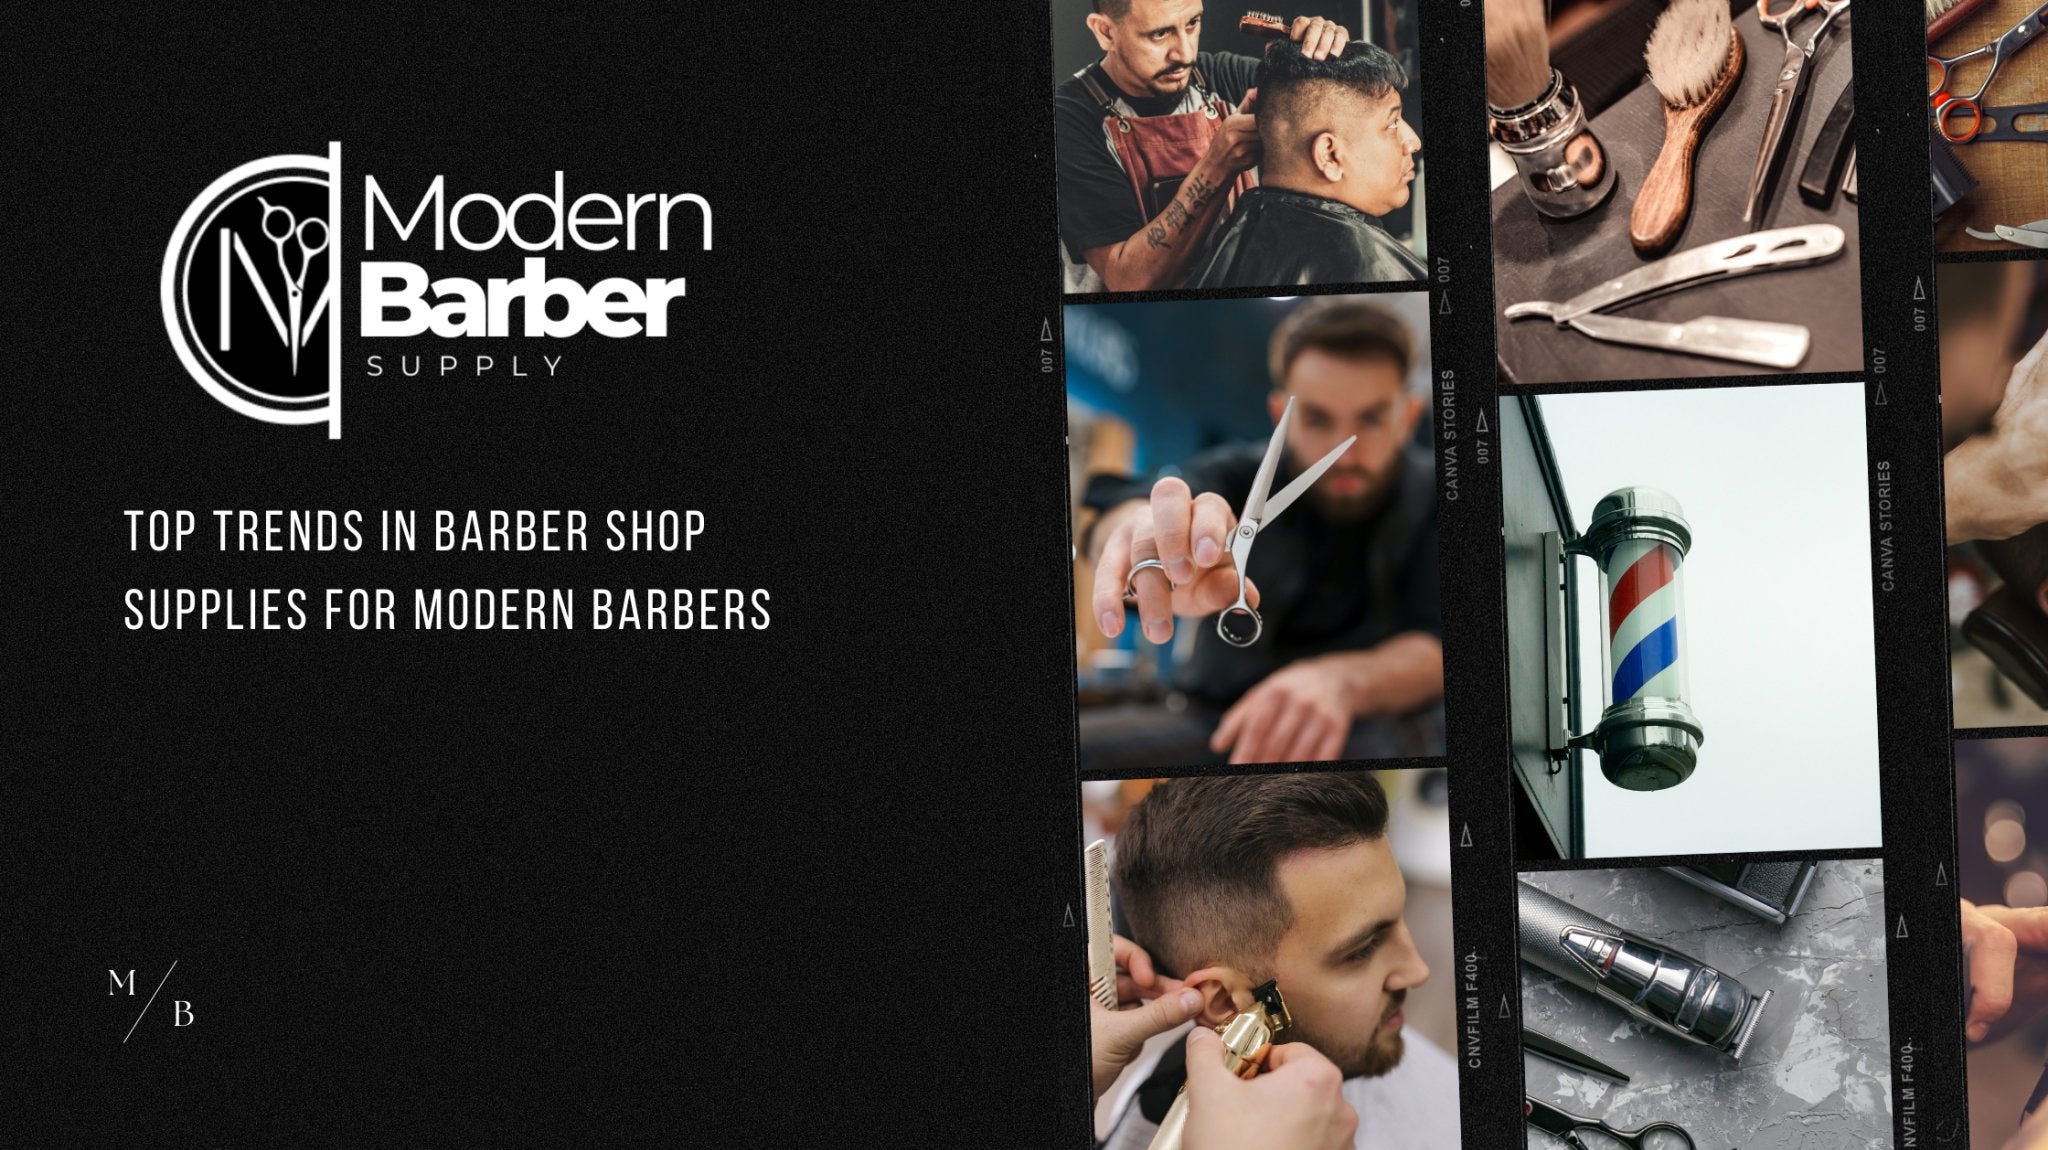 Top Trends in Barber Shop Supplies for Modern Barbers - Modern Barber Supply